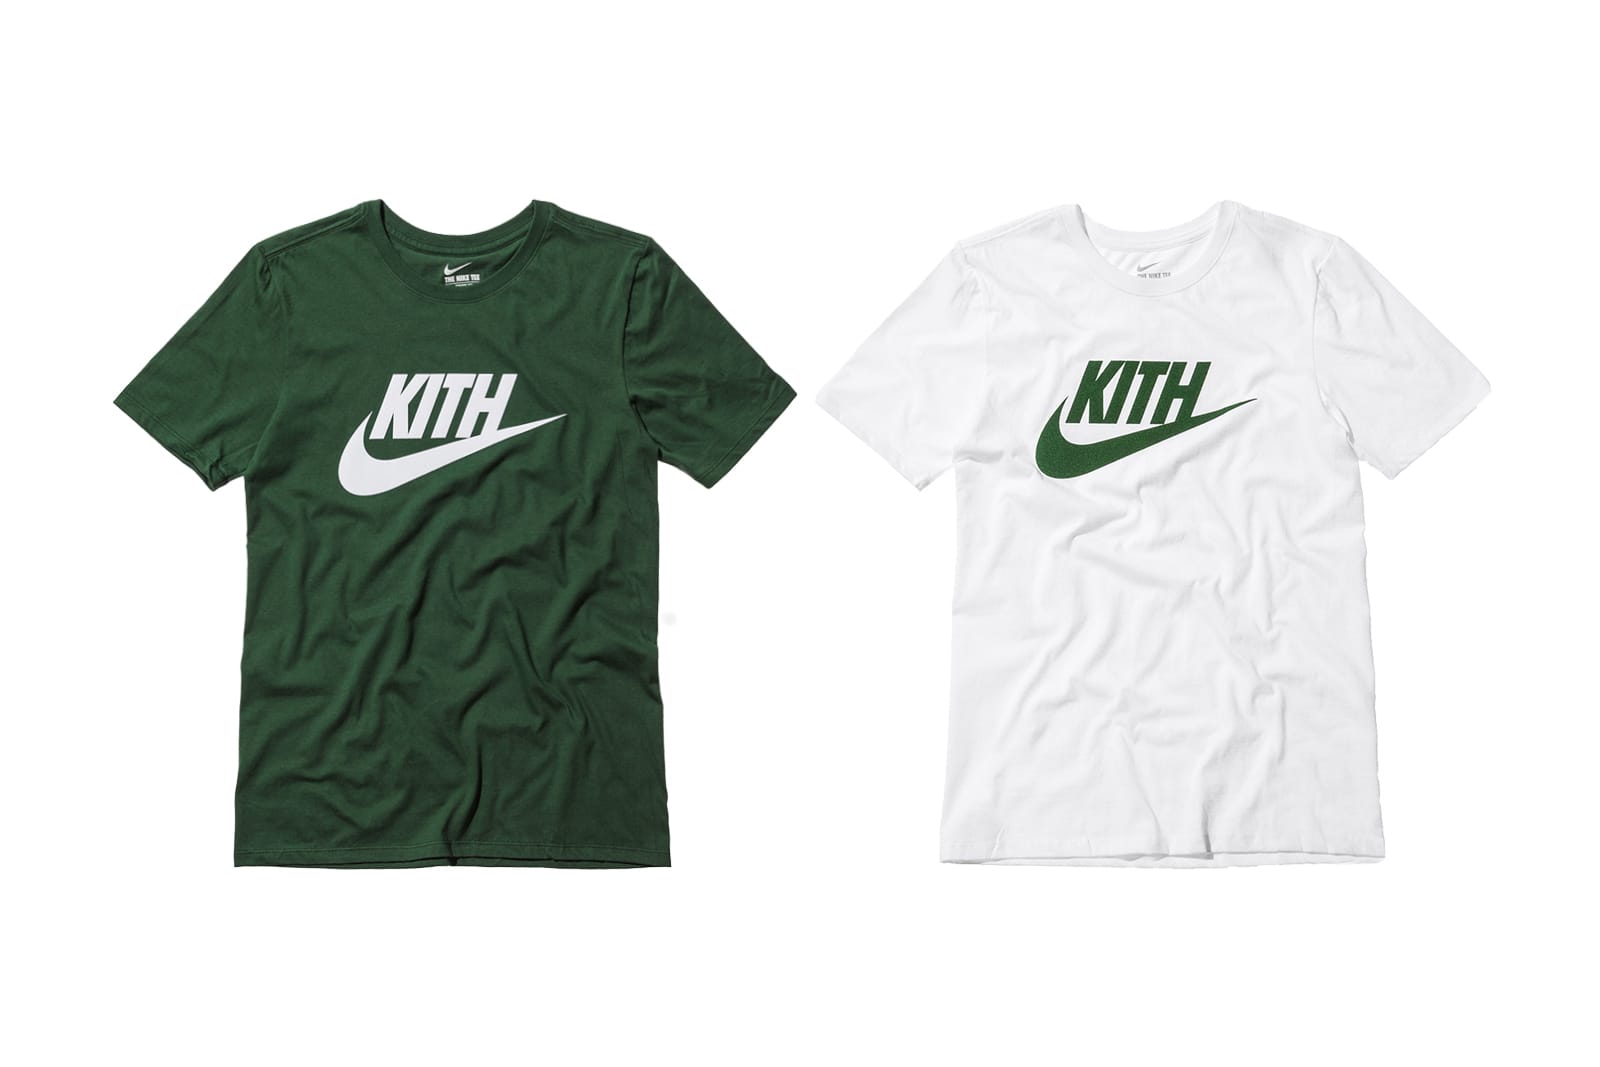 KITH and Nike Collaborate on Tees 